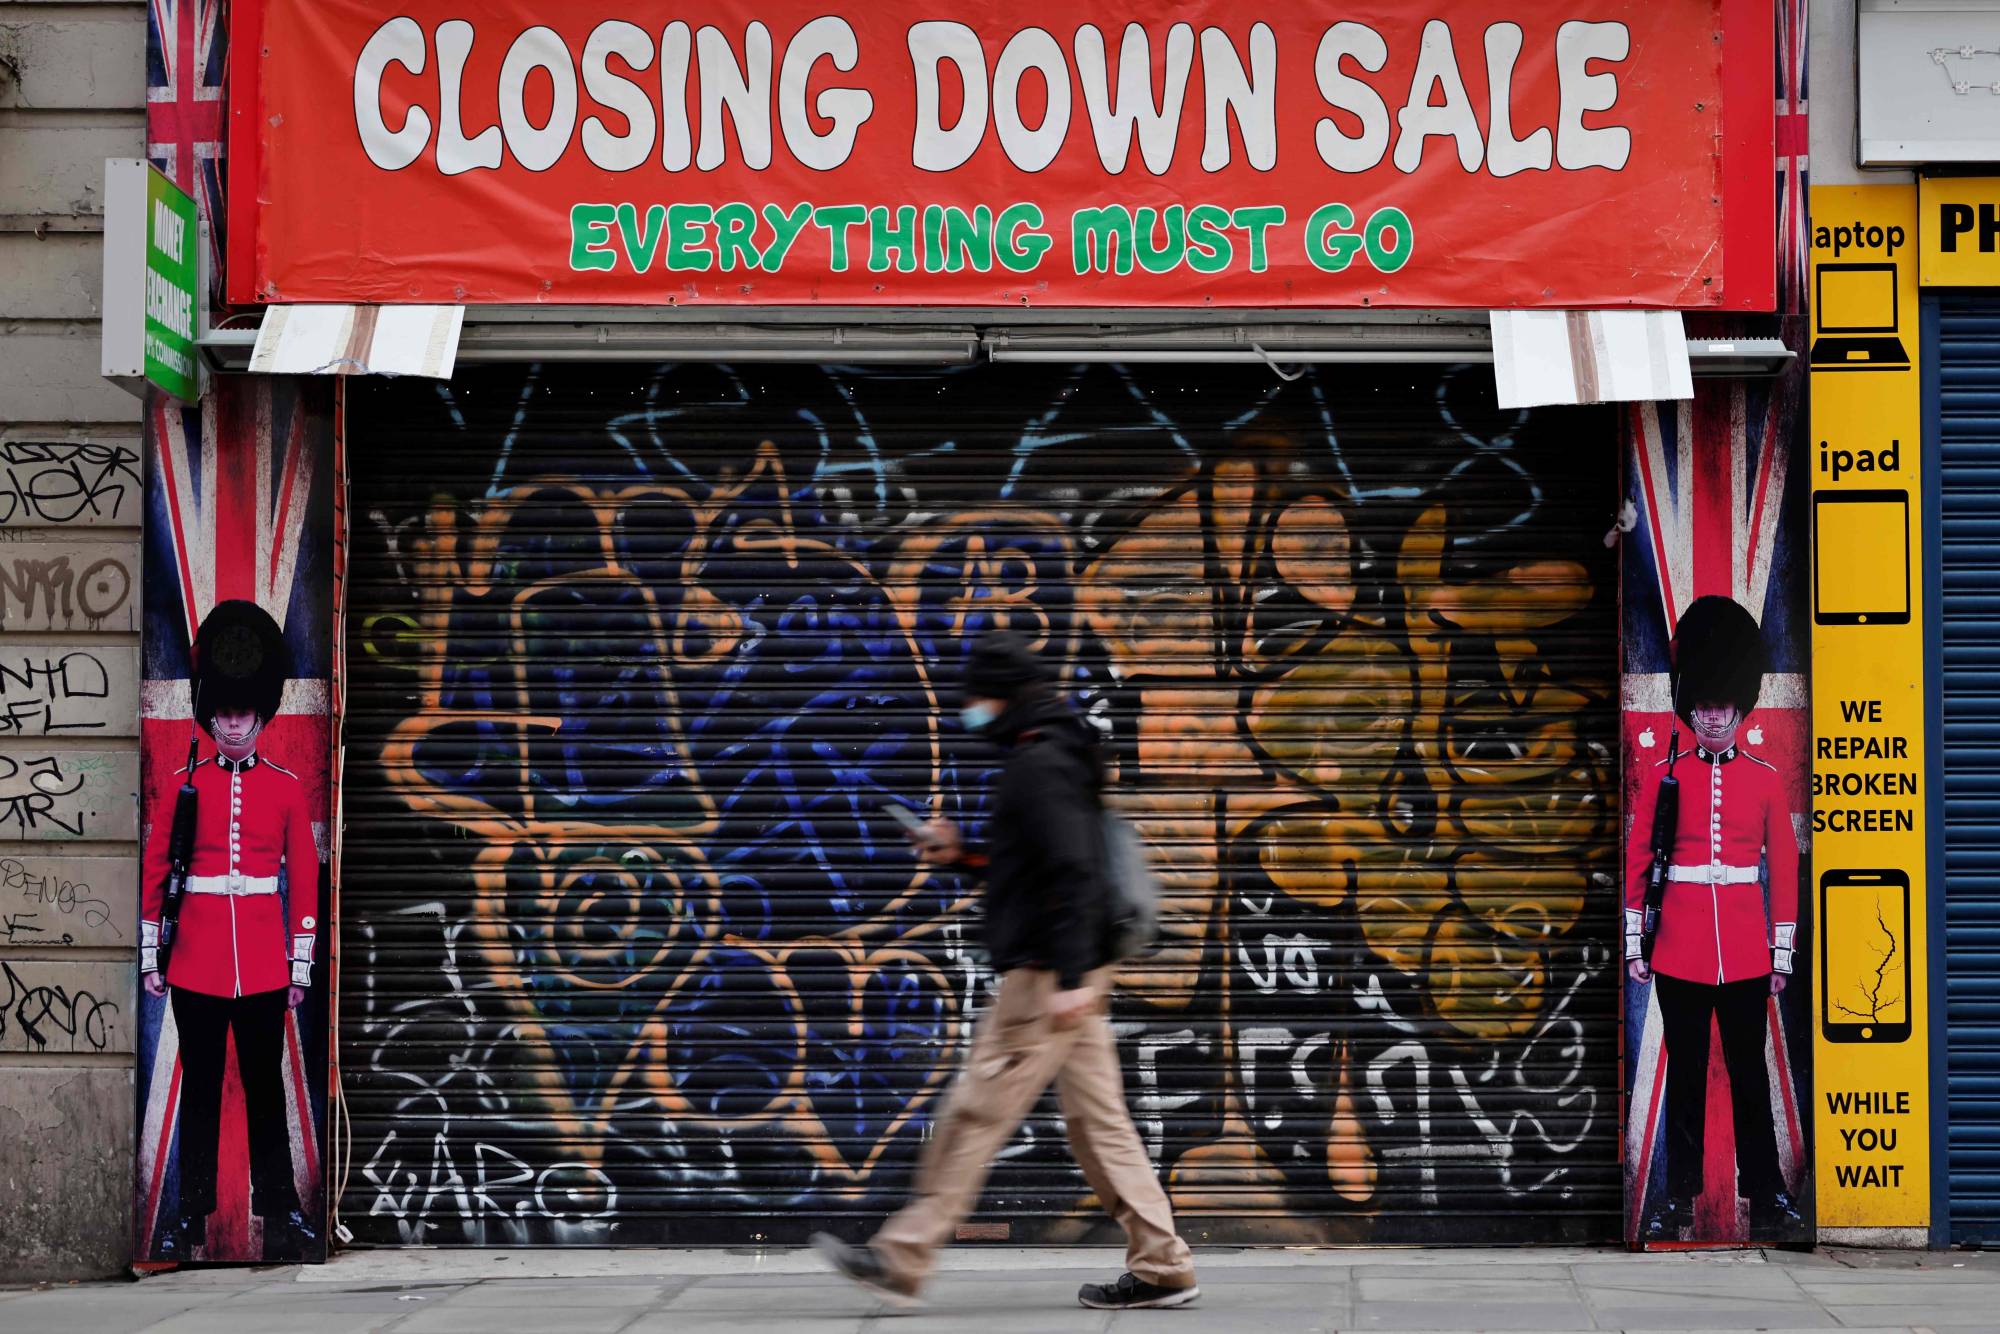 A shuttered souvenir shop on Oxford Street in central London on Friday. The U.K. has entered its third nationwide coronavirus lockdown. | AFP-JIJI